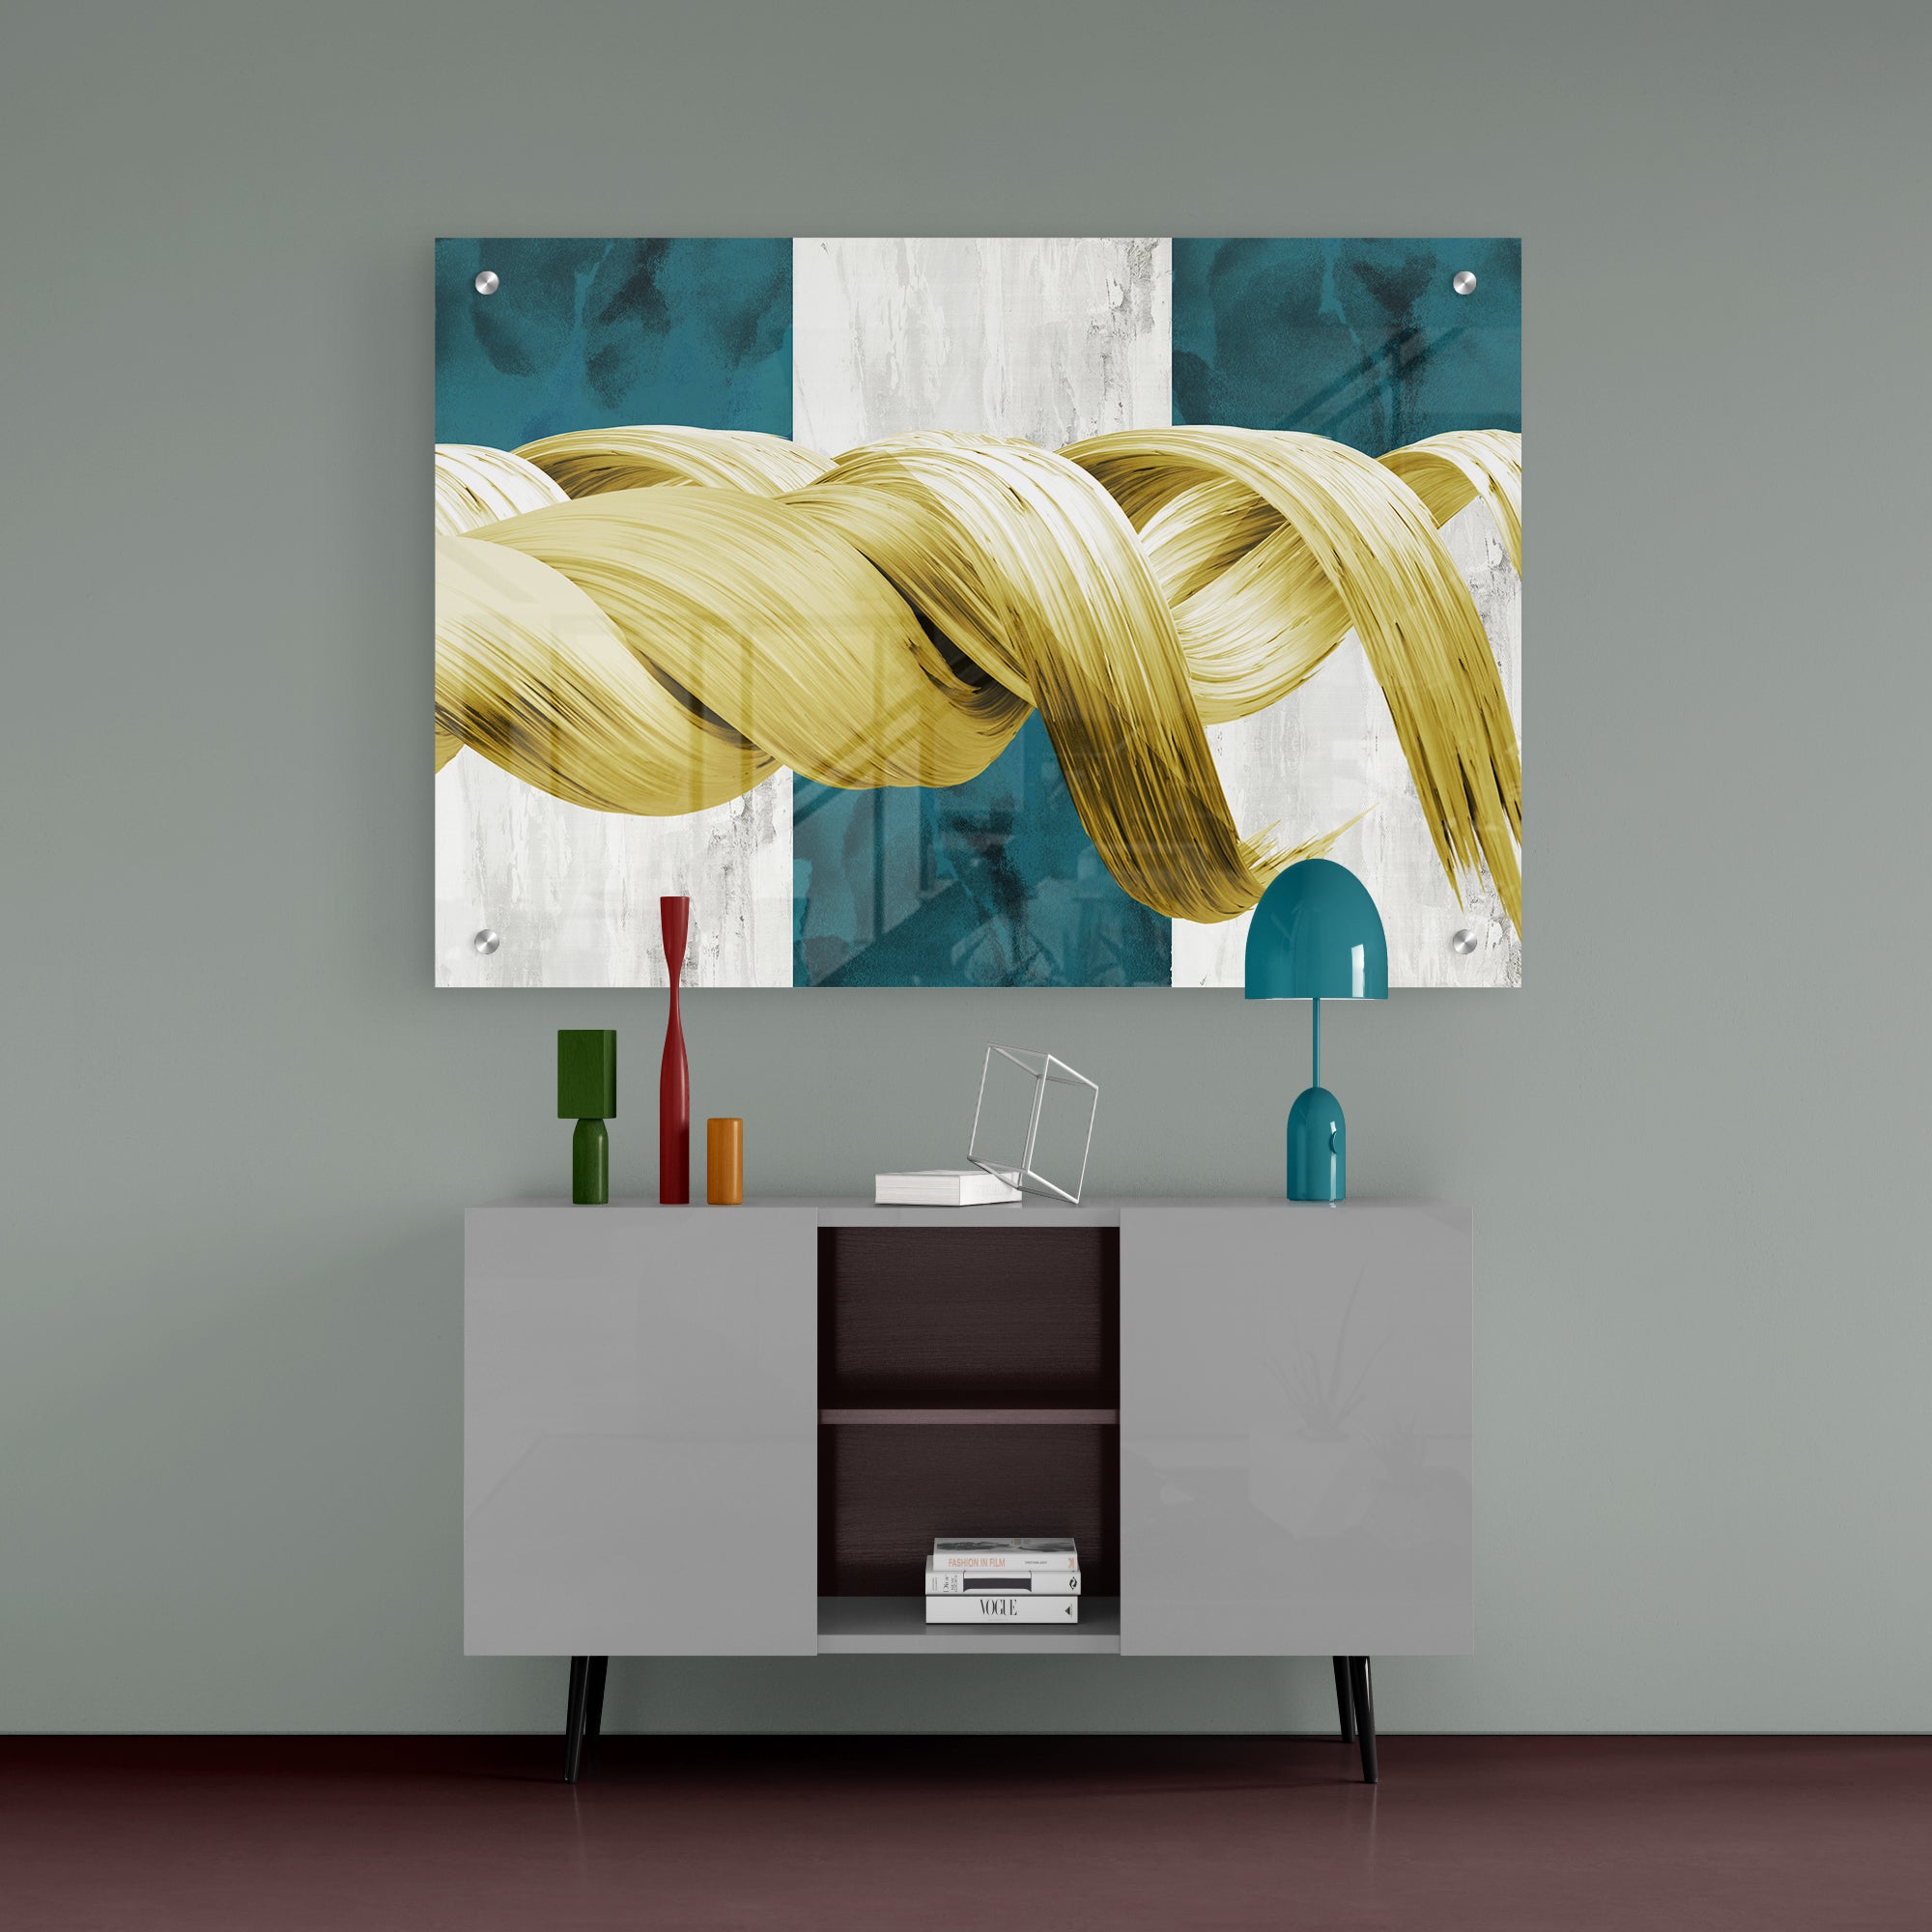 Abstract Golden And Green Modern Art Acrylic Wall Painting